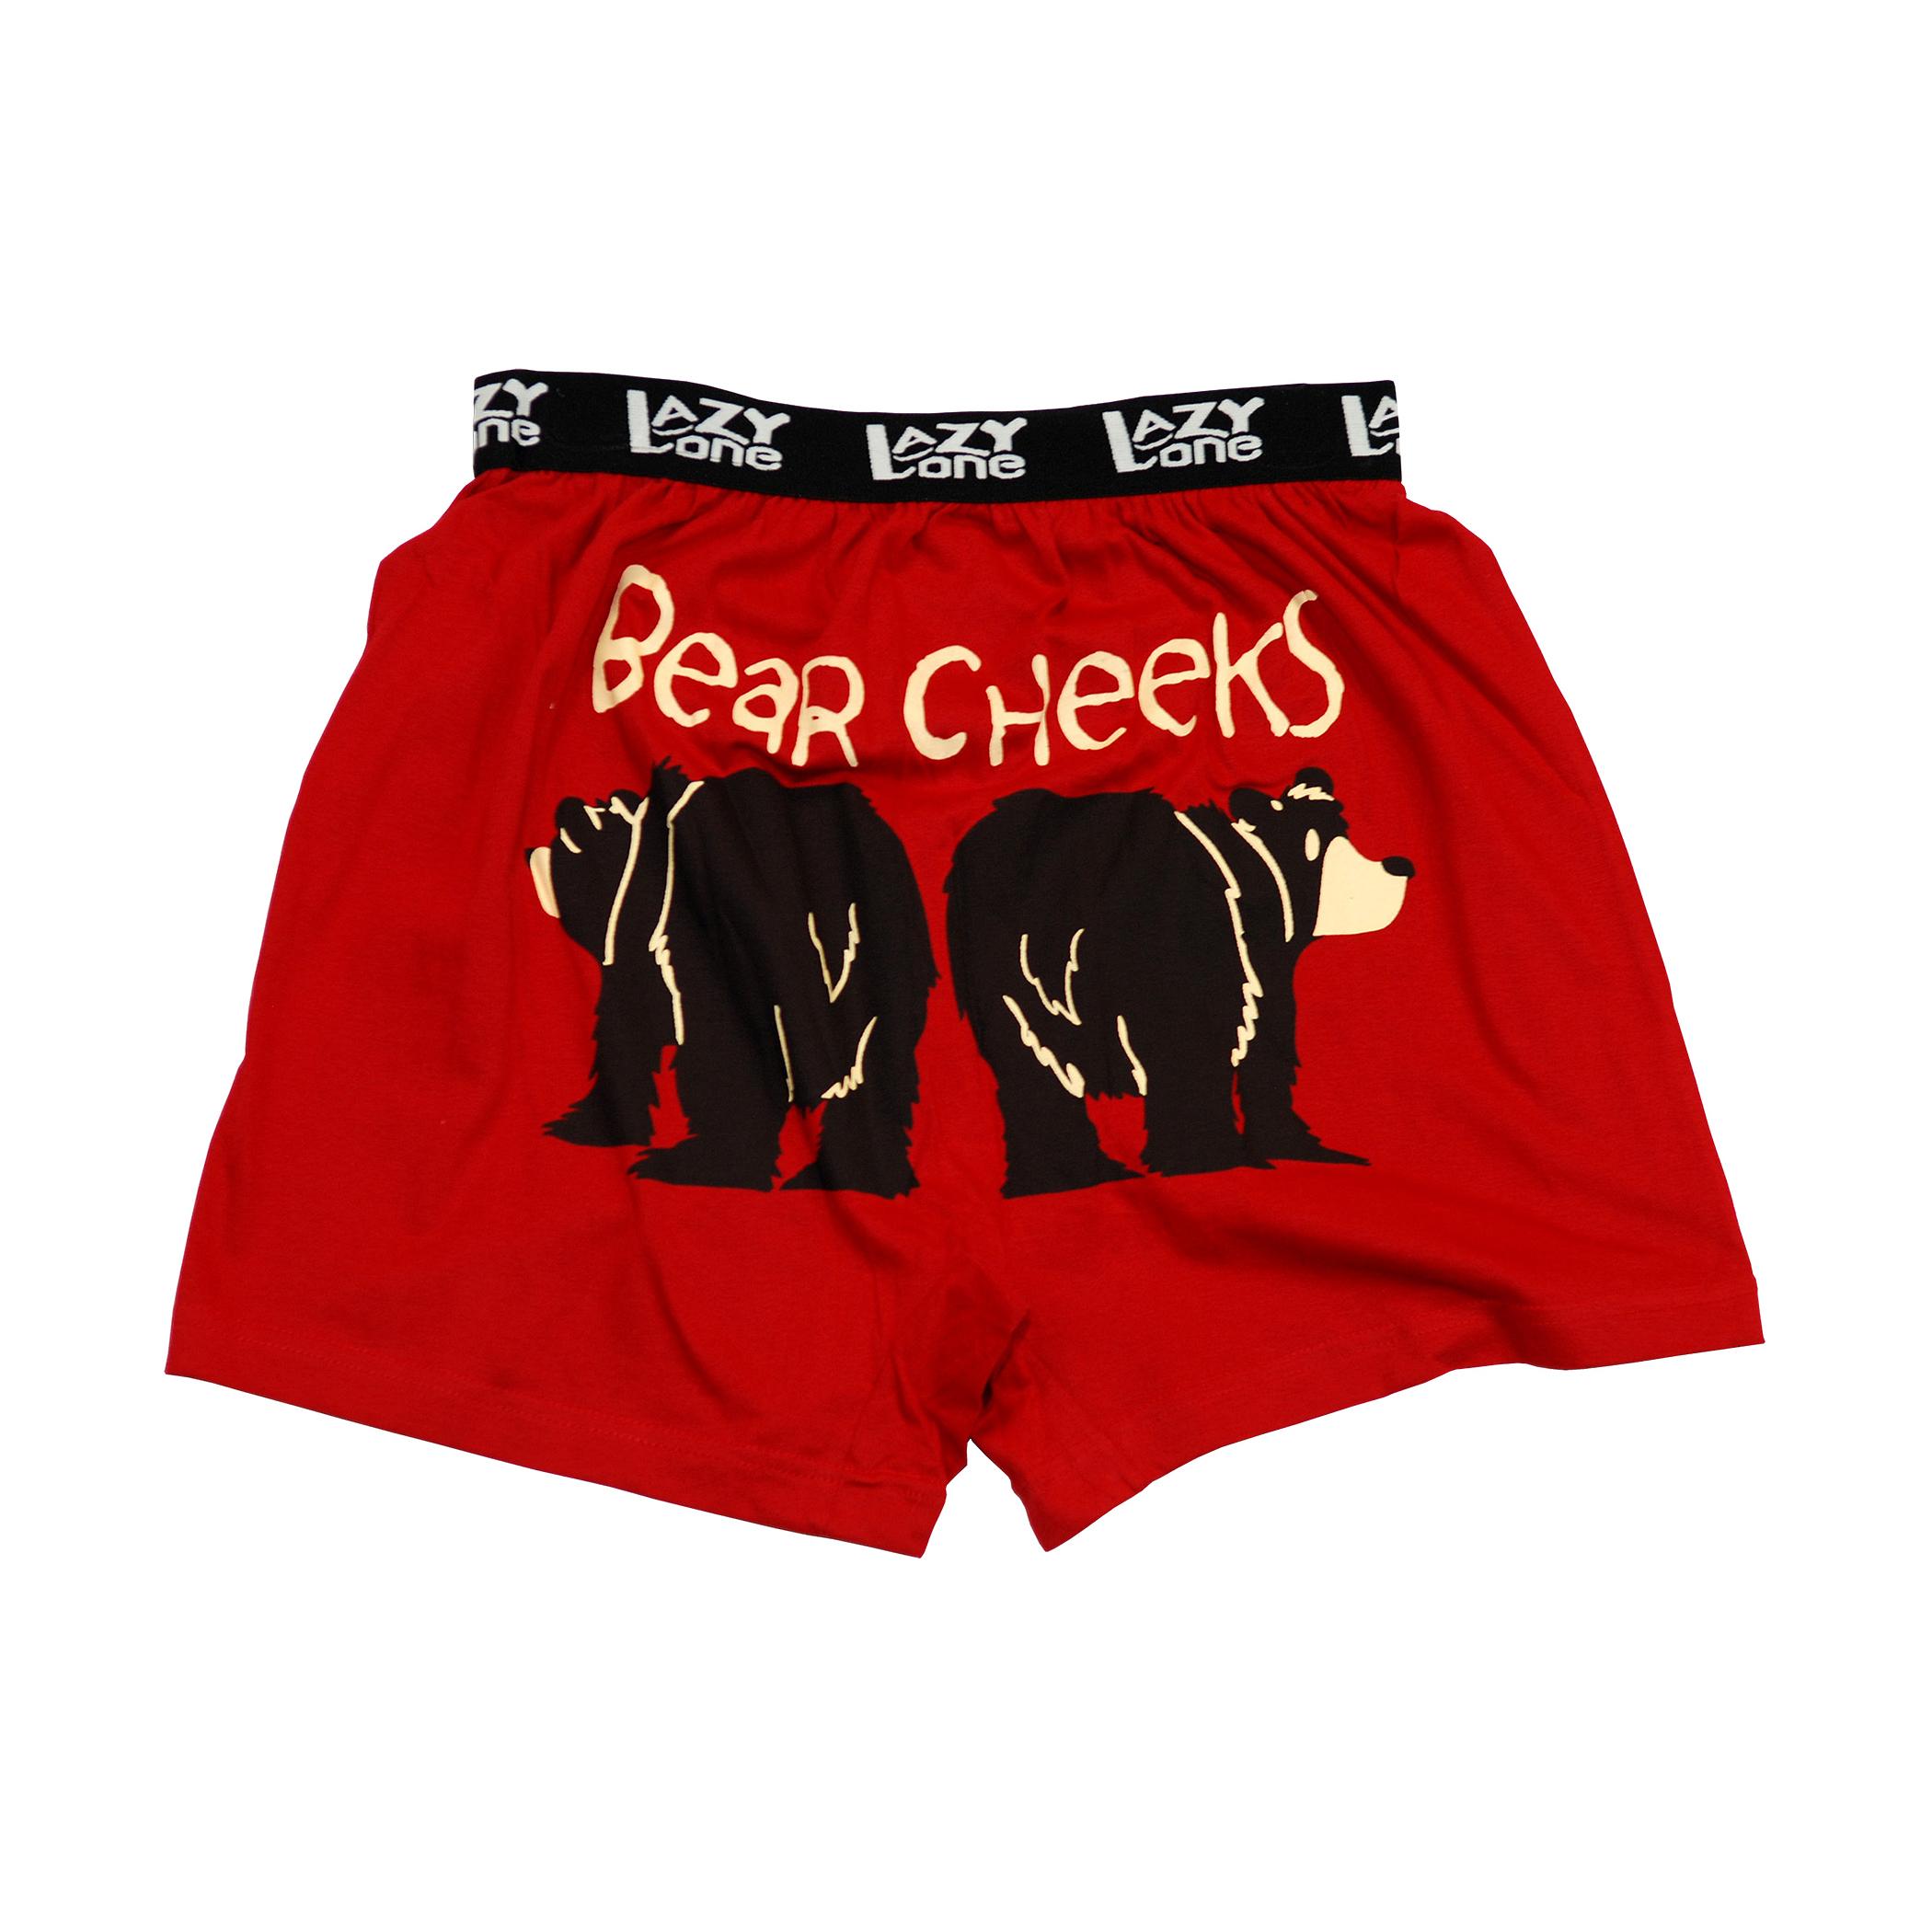 LazyOne Funny Animal Boxers, Model Name, Humorous Underwear, Gag Gifts for  Men, X-large